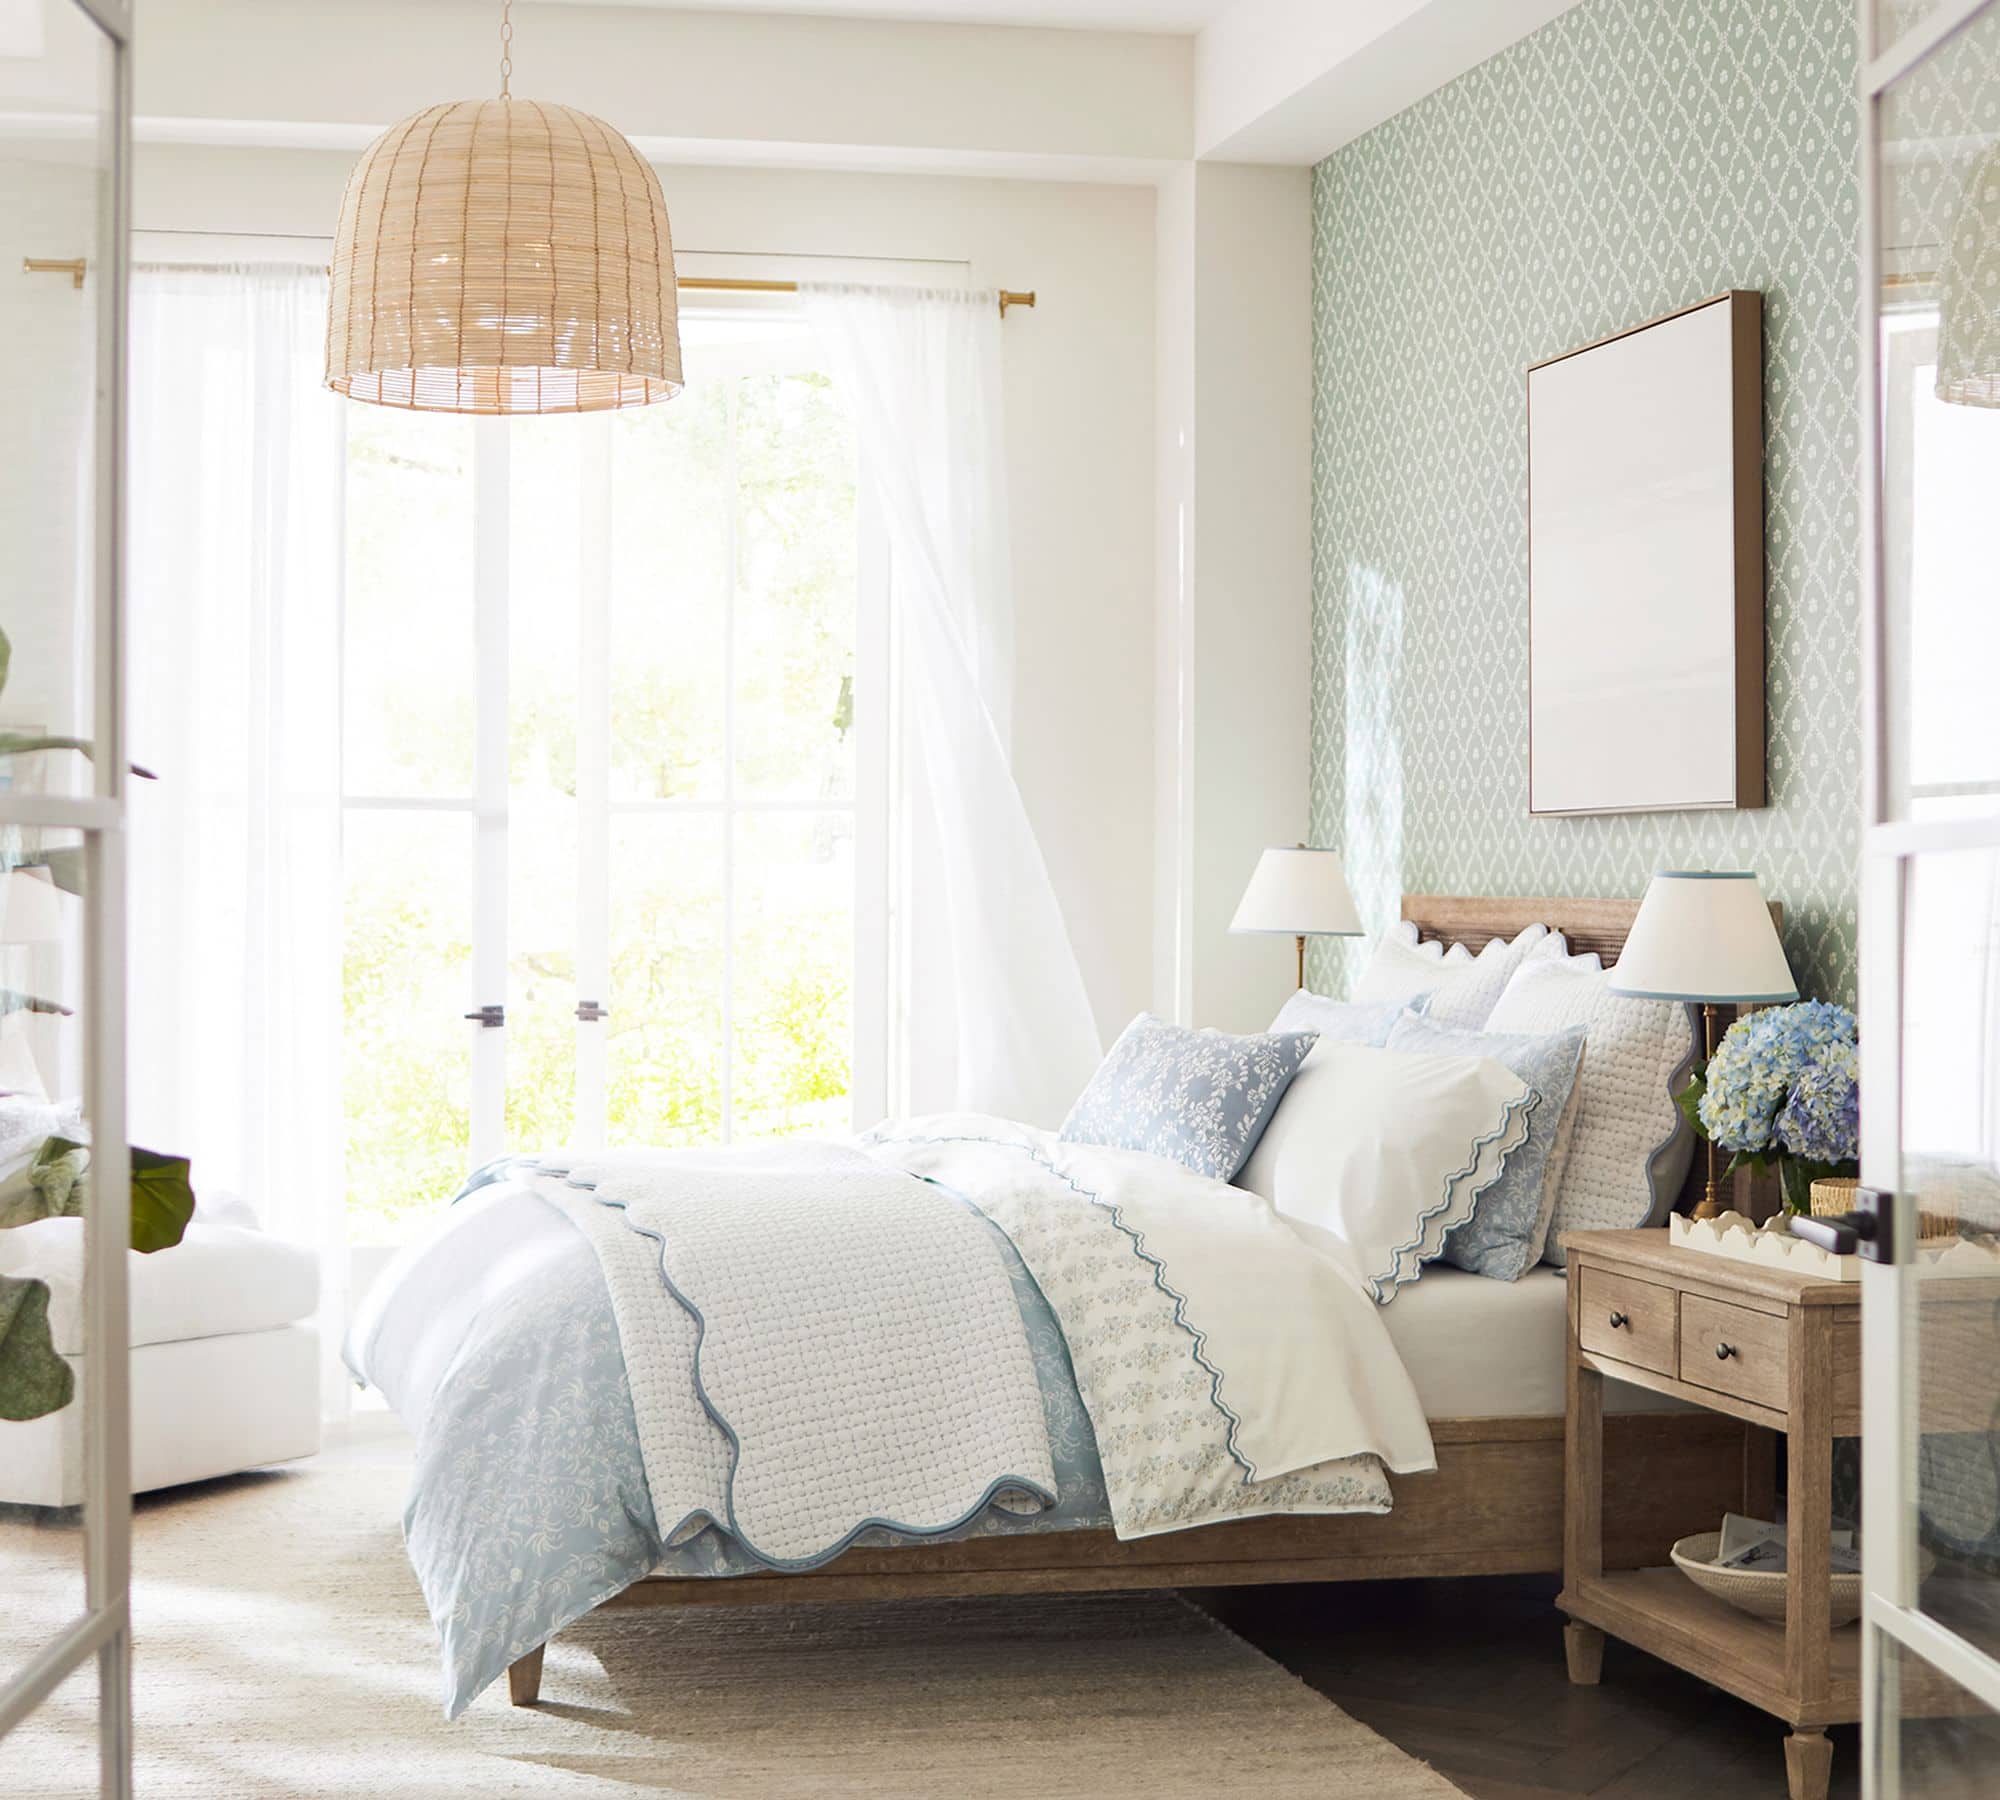 white coverlet with scalloped edge detail in blue paired with soft blue and white bedding